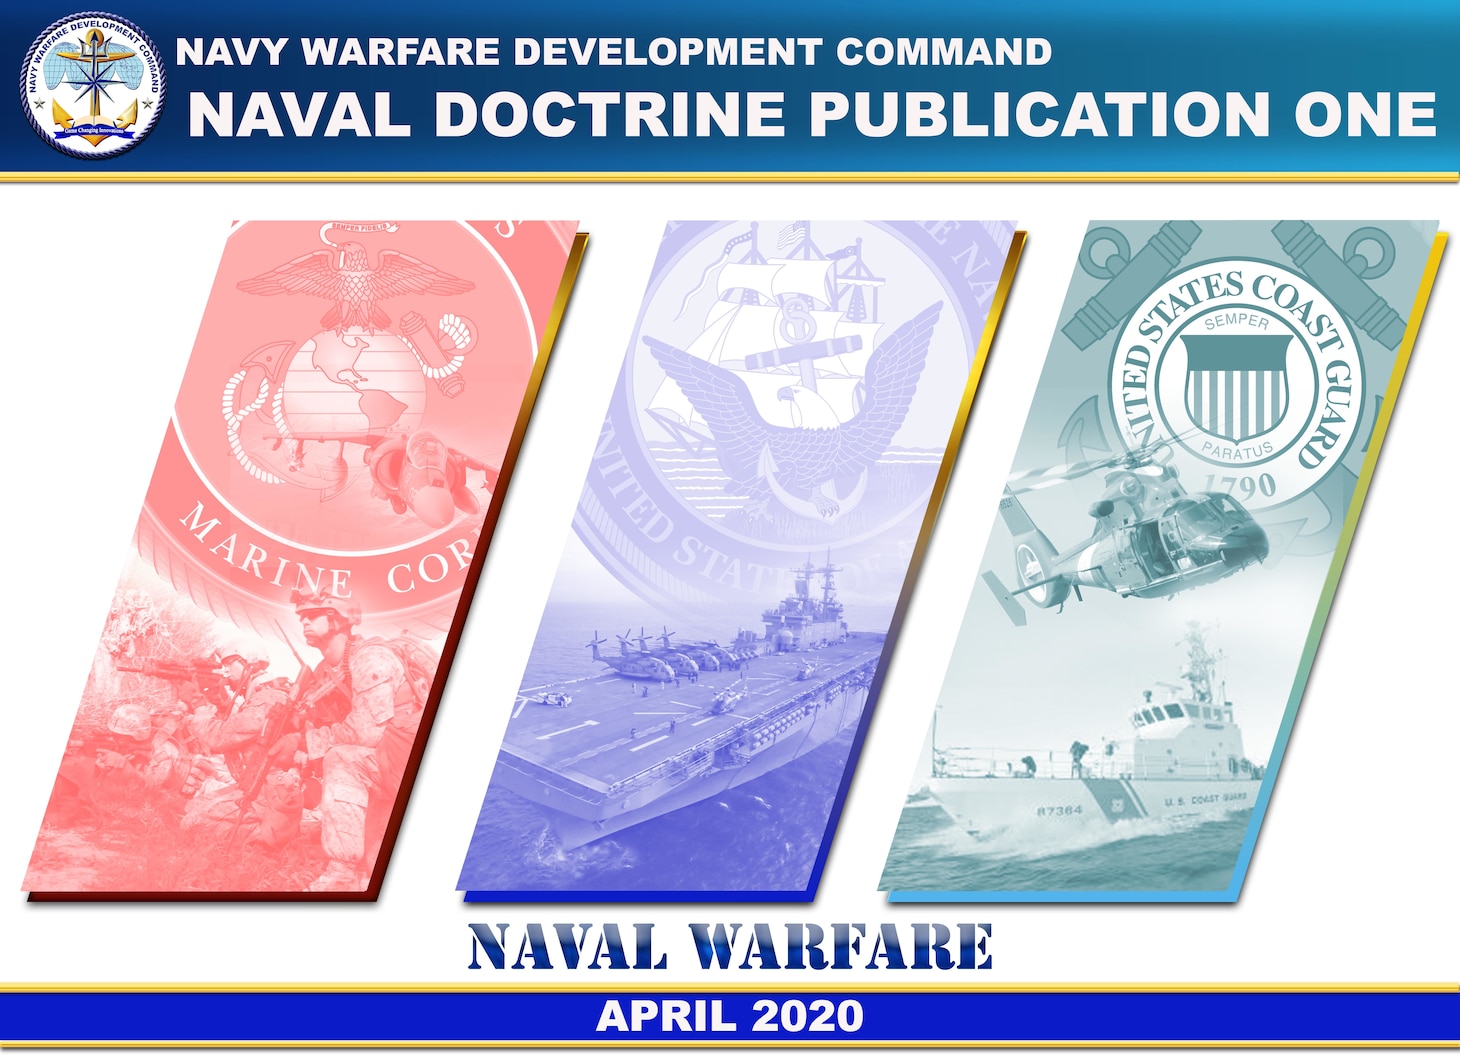 Announcement of the signing of Naval Doctrine Publication 1.